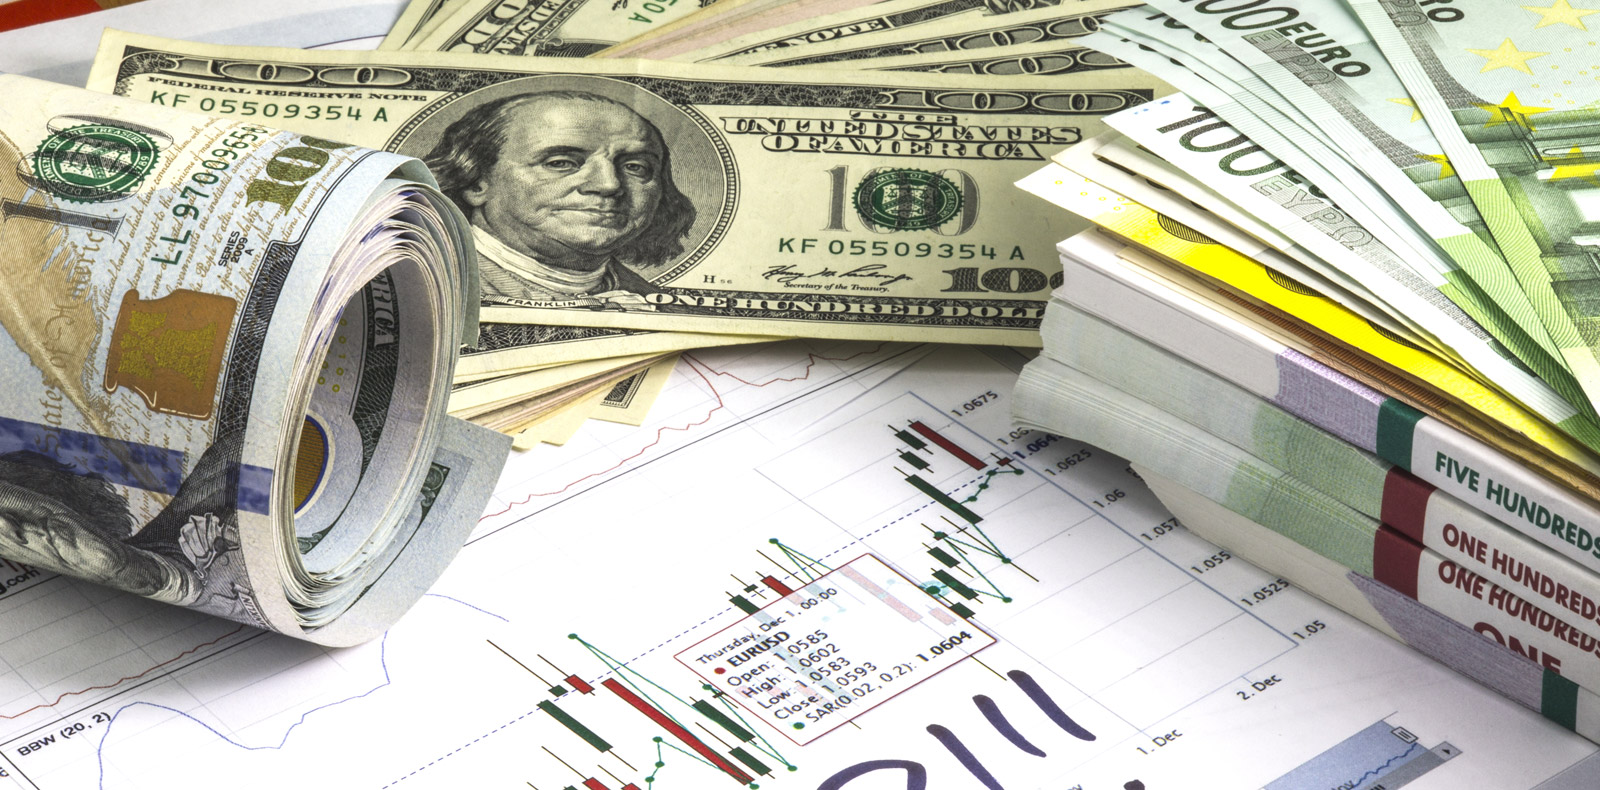 Base currencies usd for forex trading